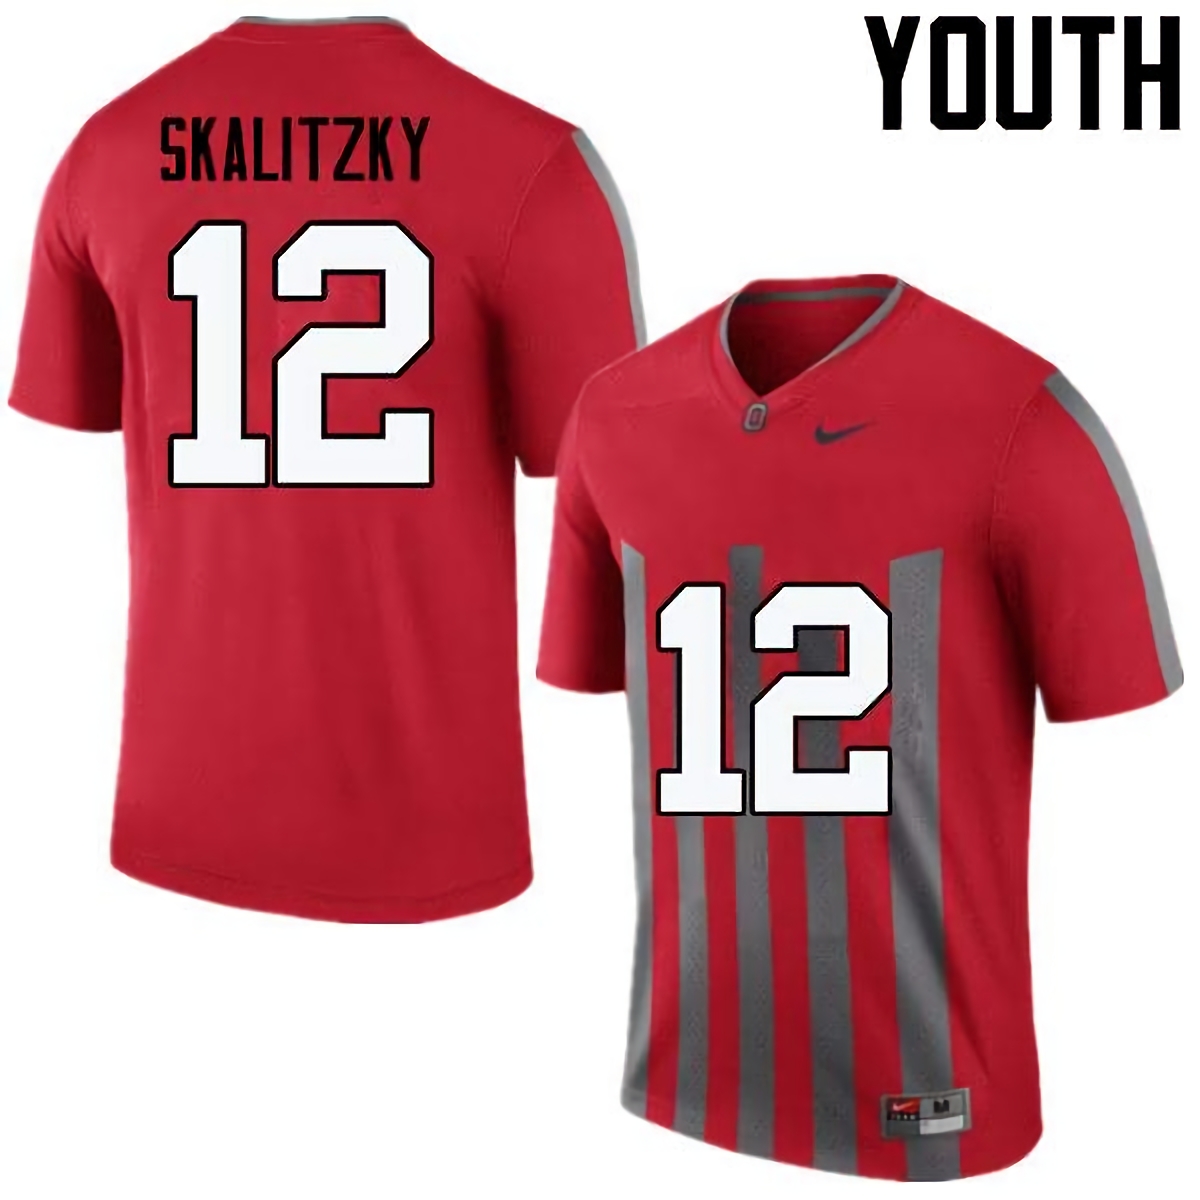 Brendan Skalitzky Ohio State Buckeyes Youth NCAA #12 Nike Throwback Red College Stitched Football Jersey EWD1656CB